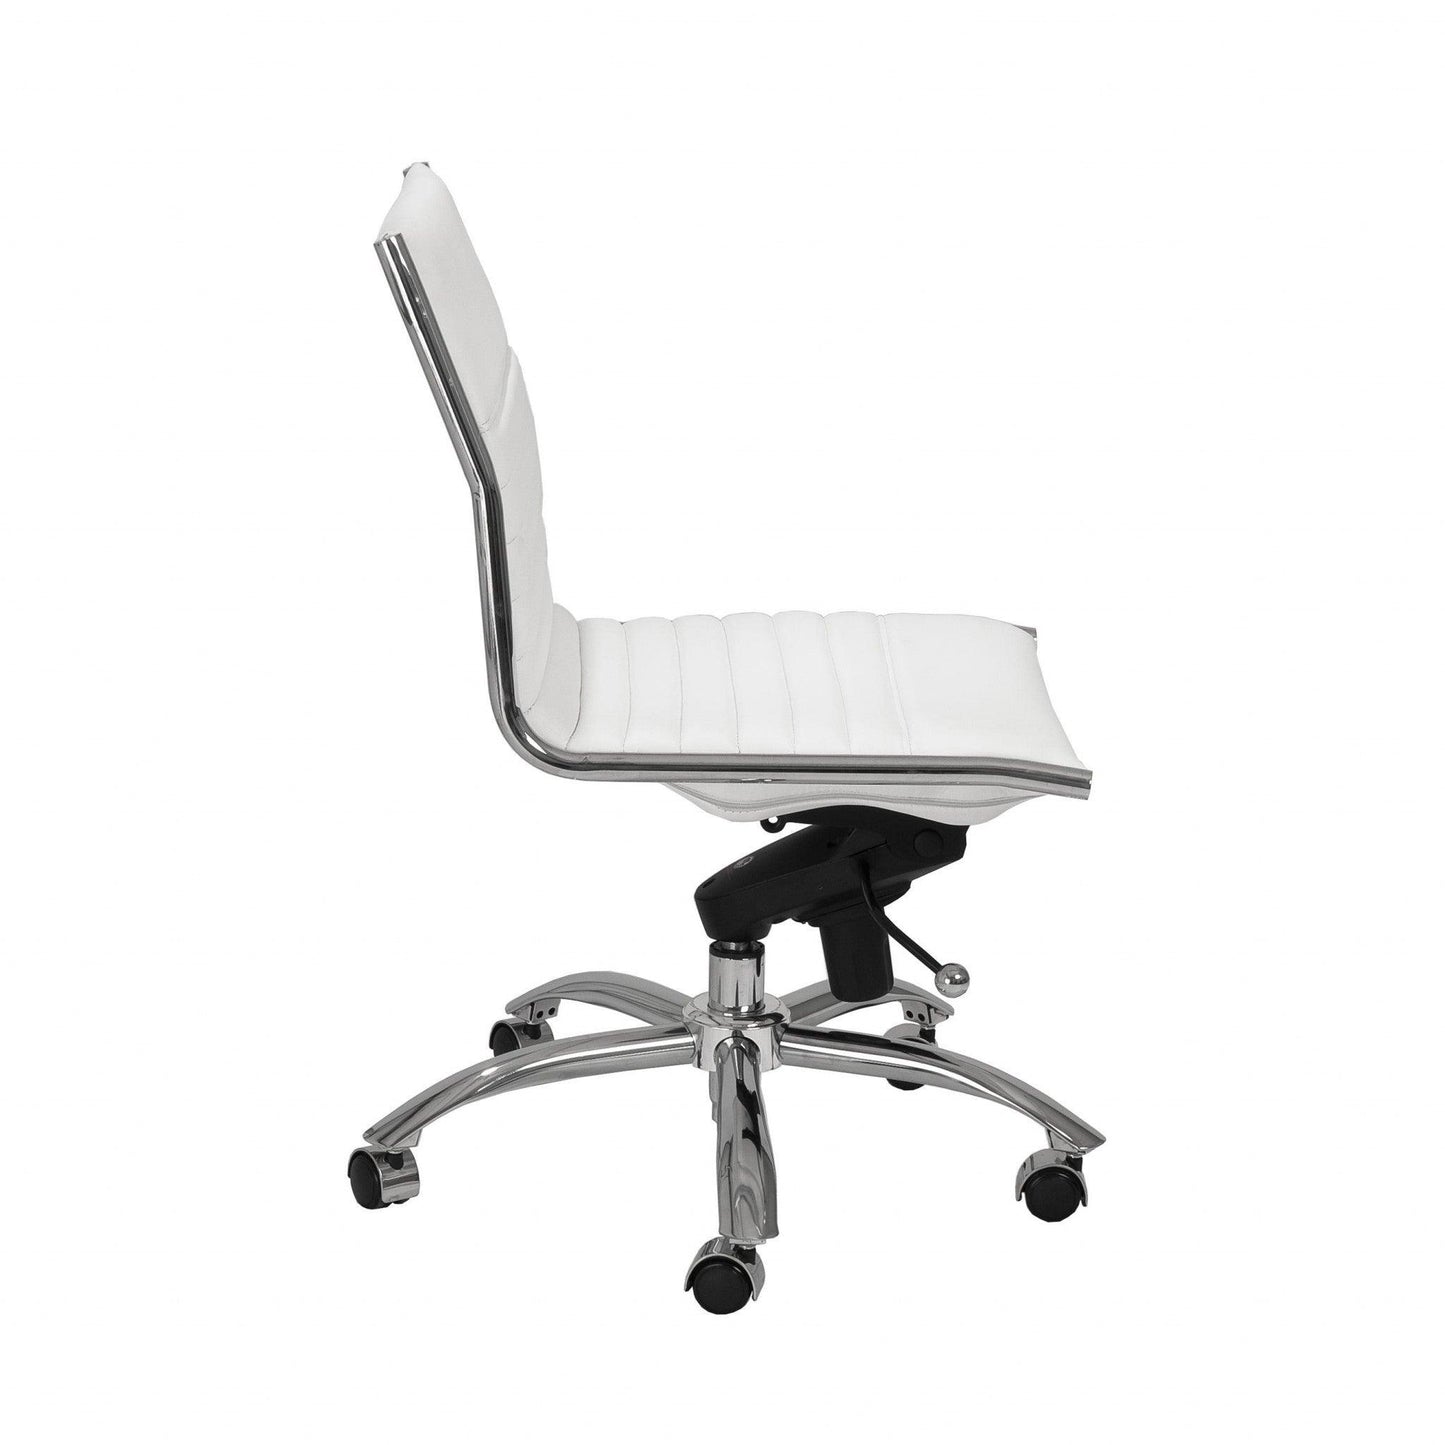 26.38" X 25.99" X 38.19" Low Back Office Chair without Armrests in White with Chromed Steel Base - AFS